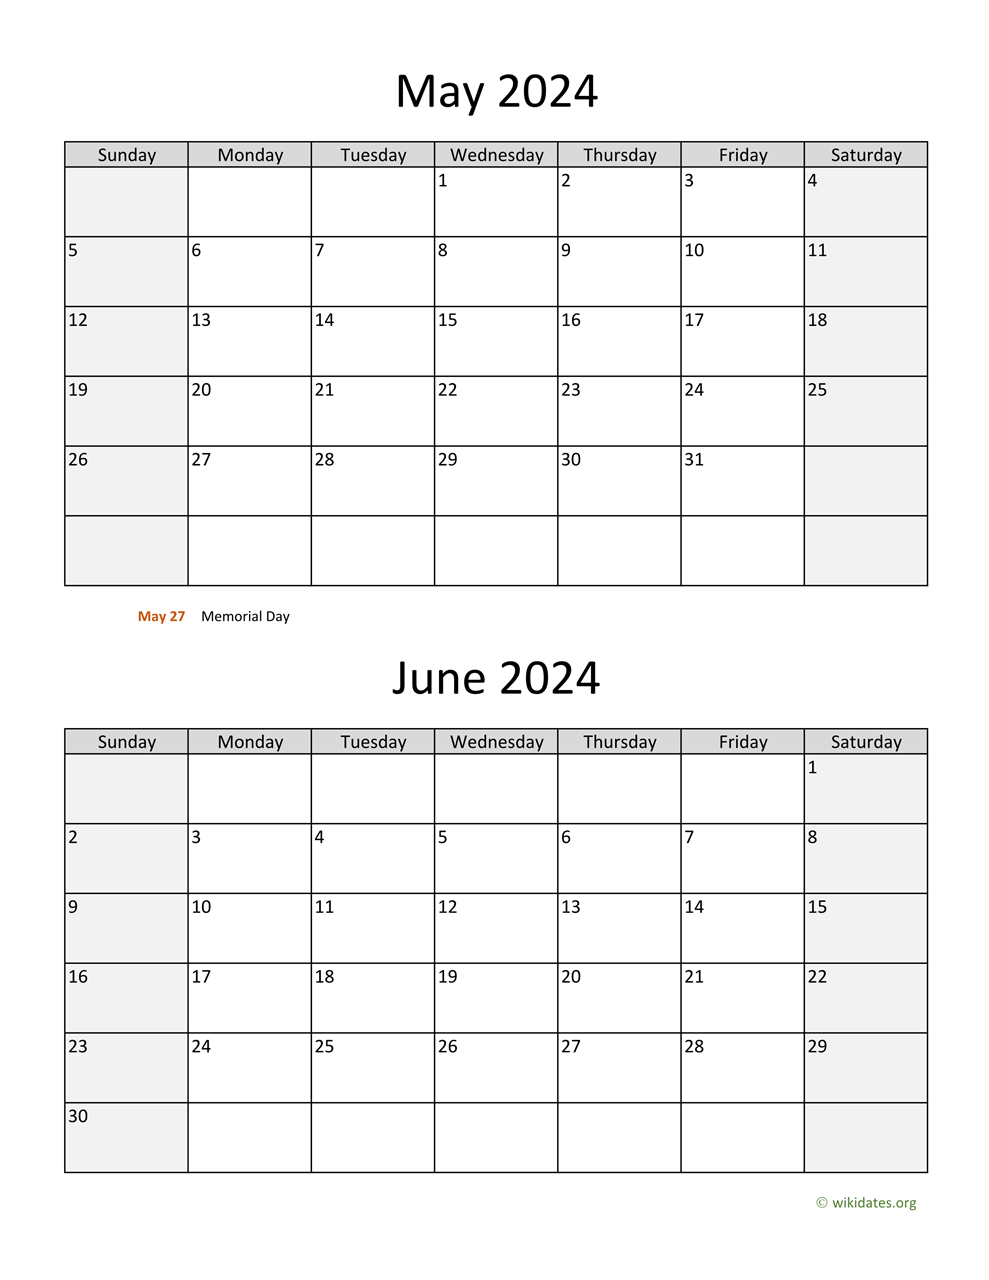 May And June 2024 Calendar | Wikidates for Printable May And June Calendar 2024